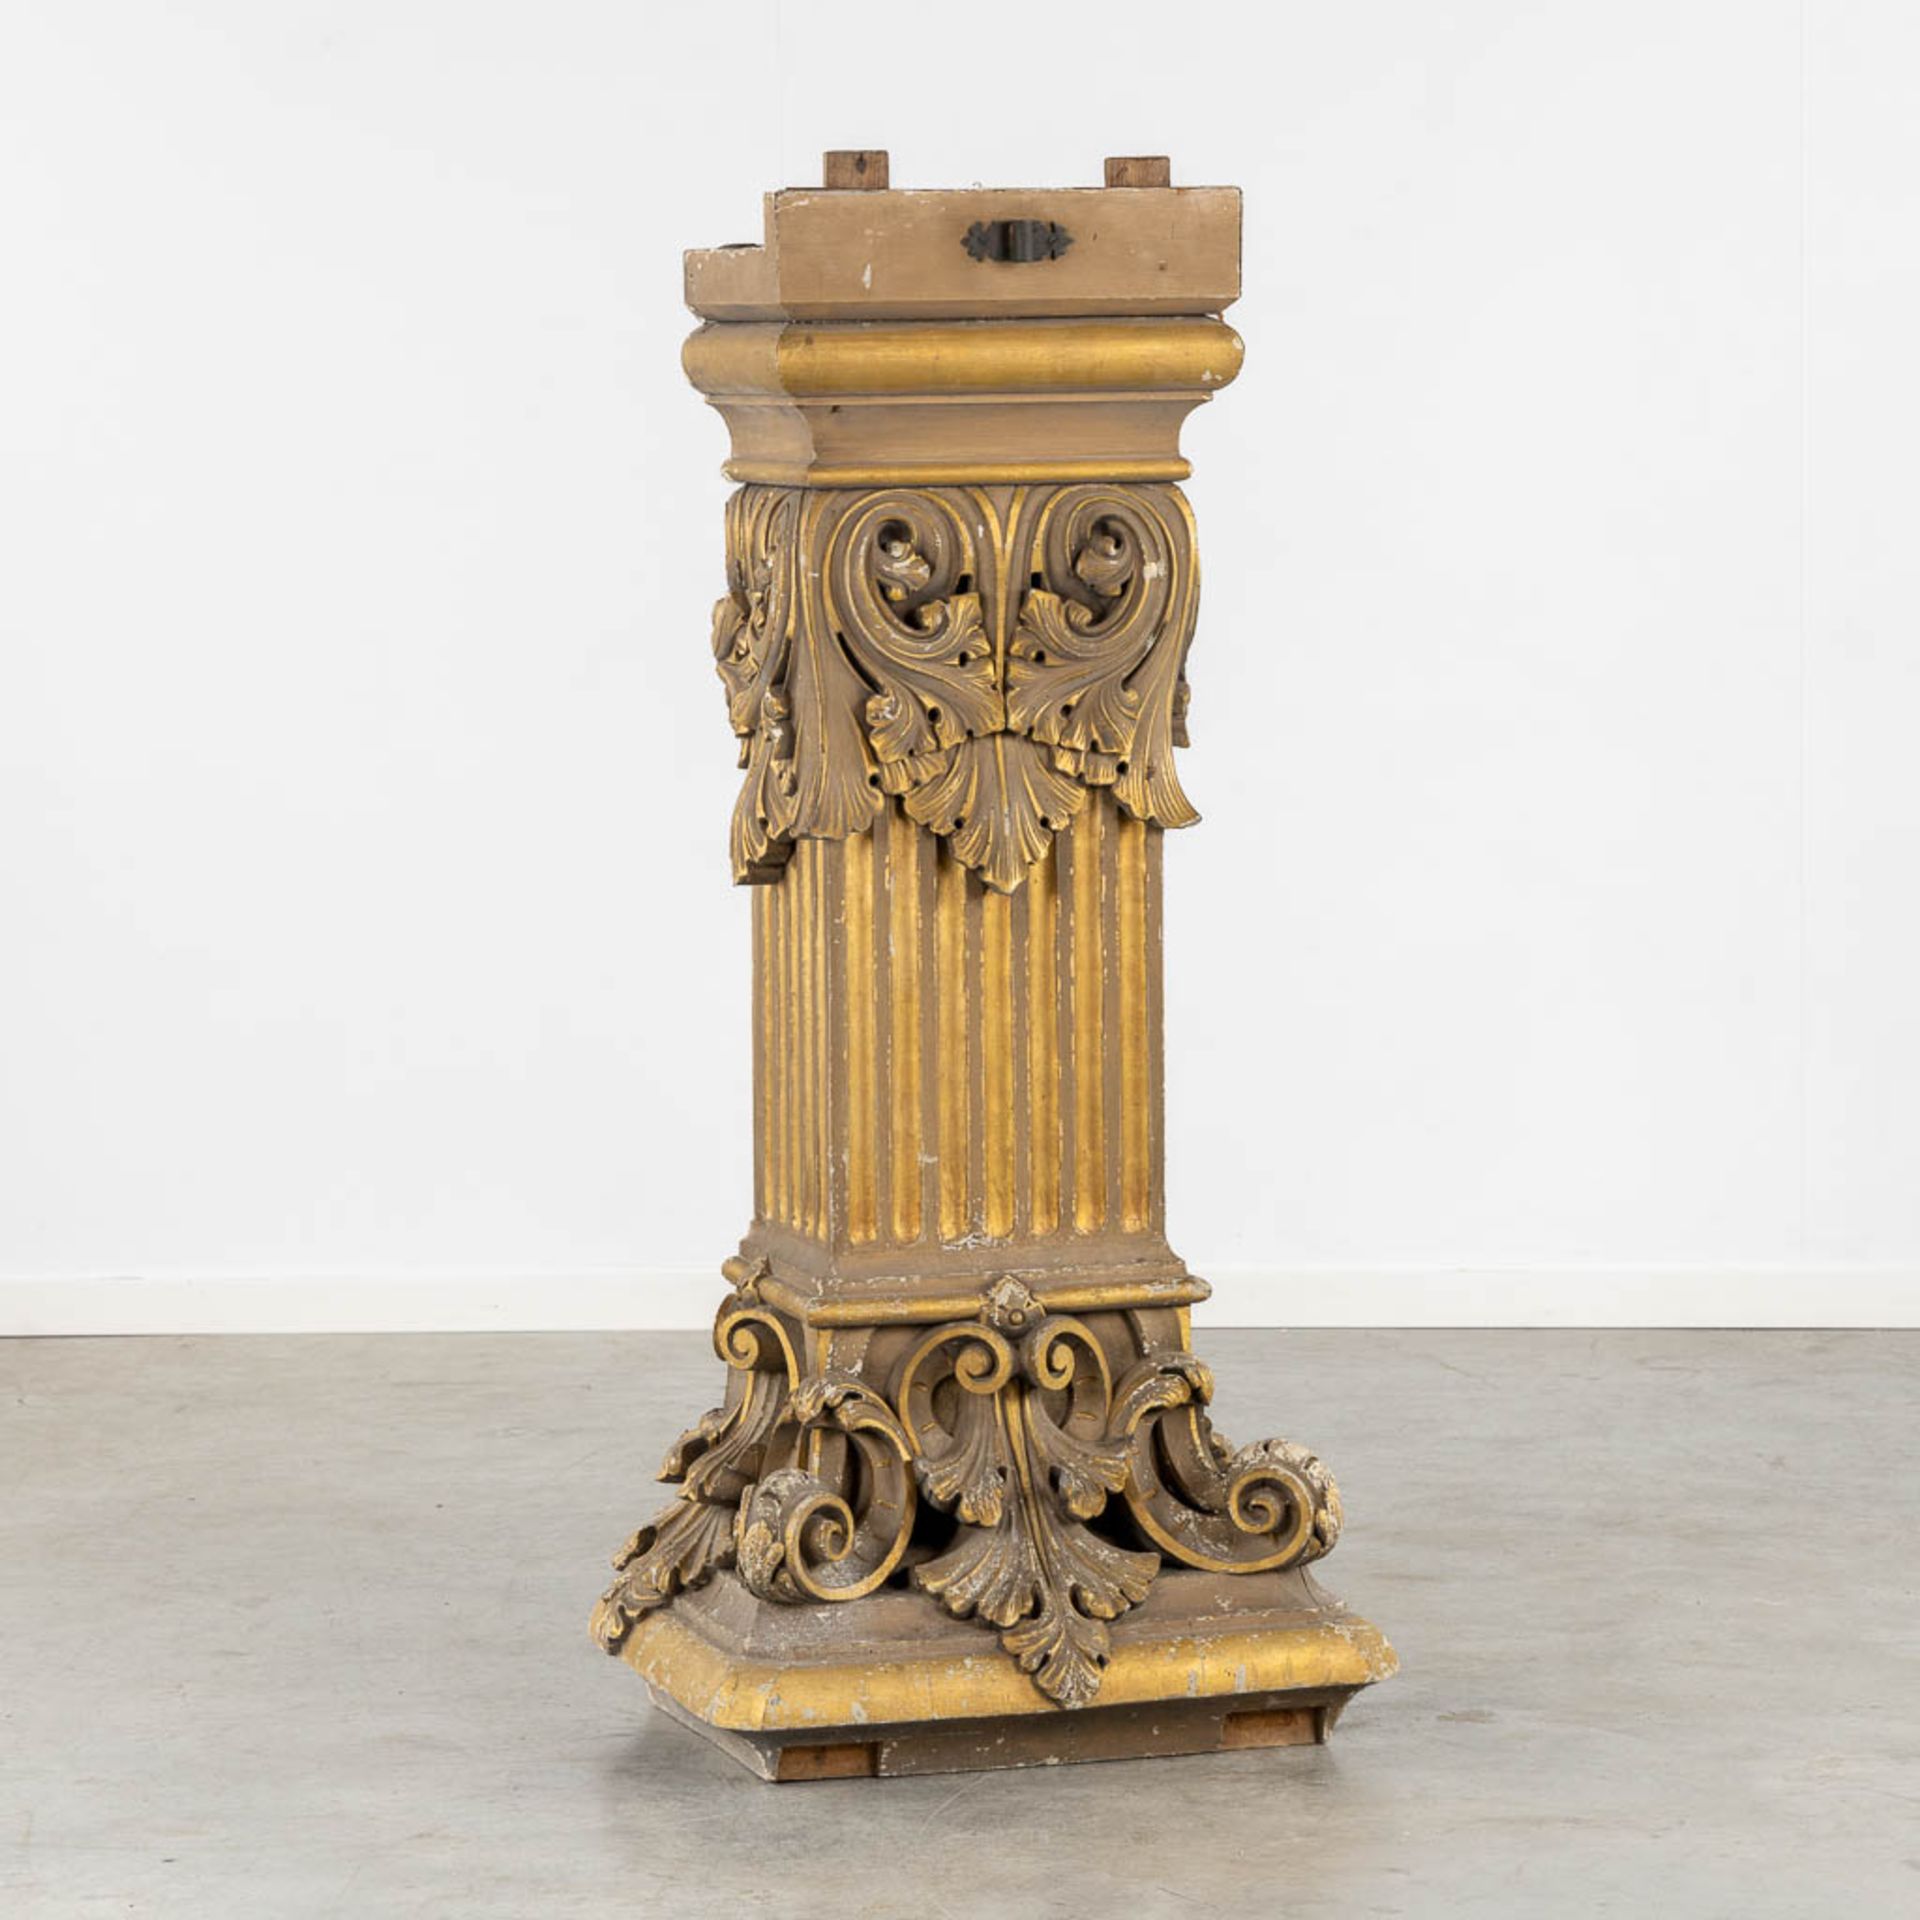 A richly gilt and woodsculptured pedestal with an ionic capitel. Circa 1900. (L:44 x W:60 x H:130 cm - Image 3 of 14